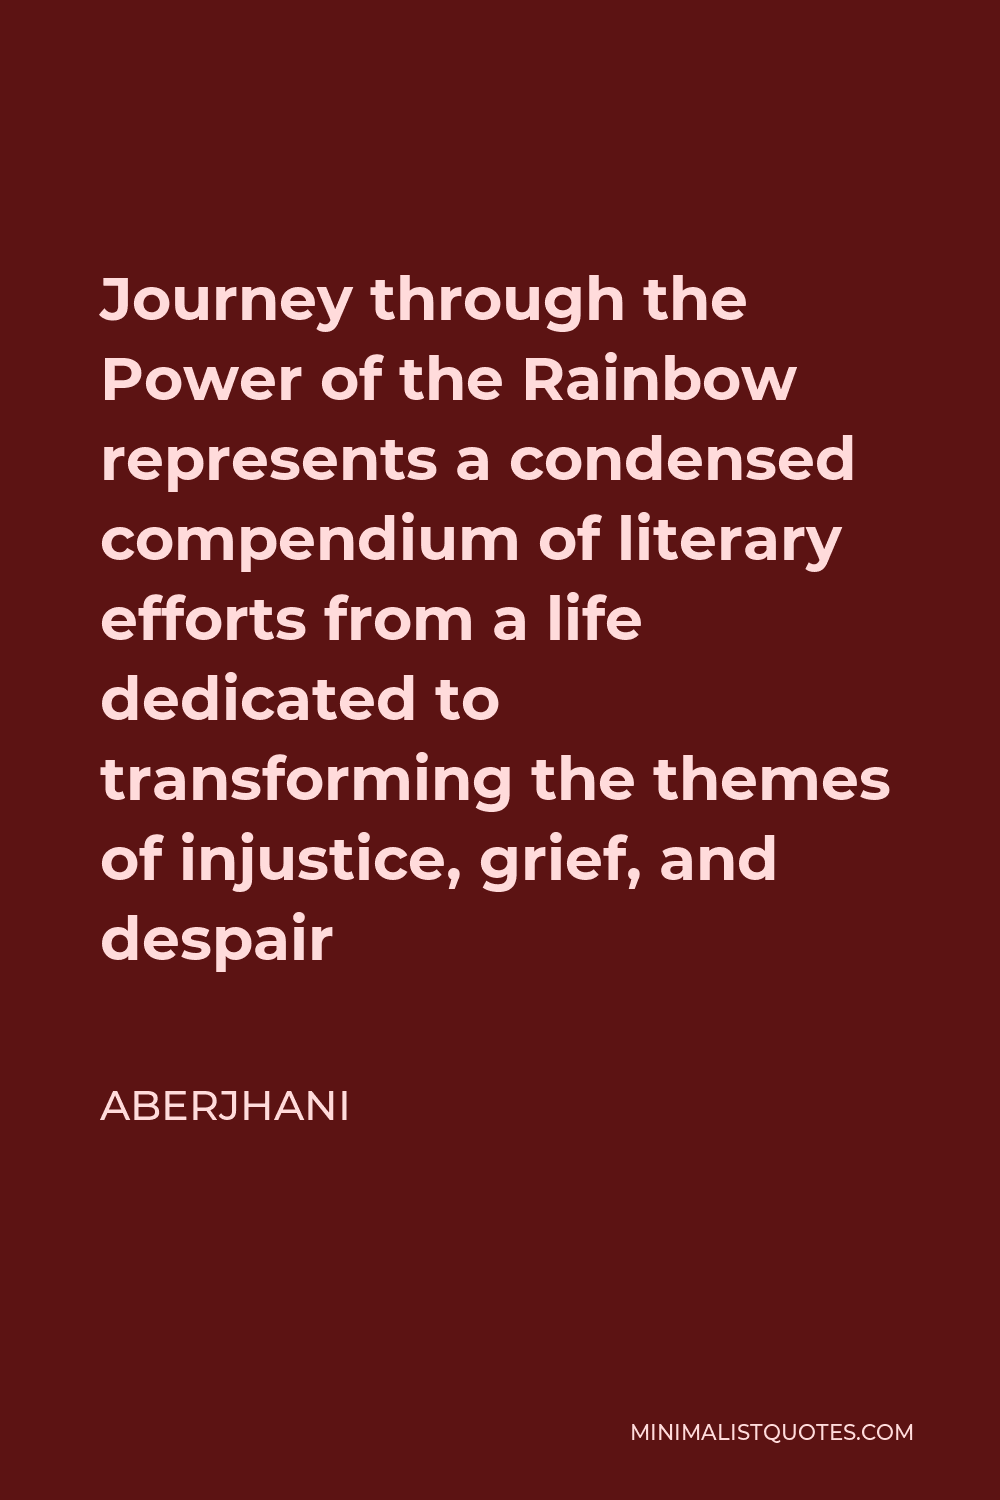 Aberjhani Quote - Journey through the Power of the Rainbow represents a condensed compendium of literary efforts from a life dedicated to transforming the themes of injustice, grief, and despair